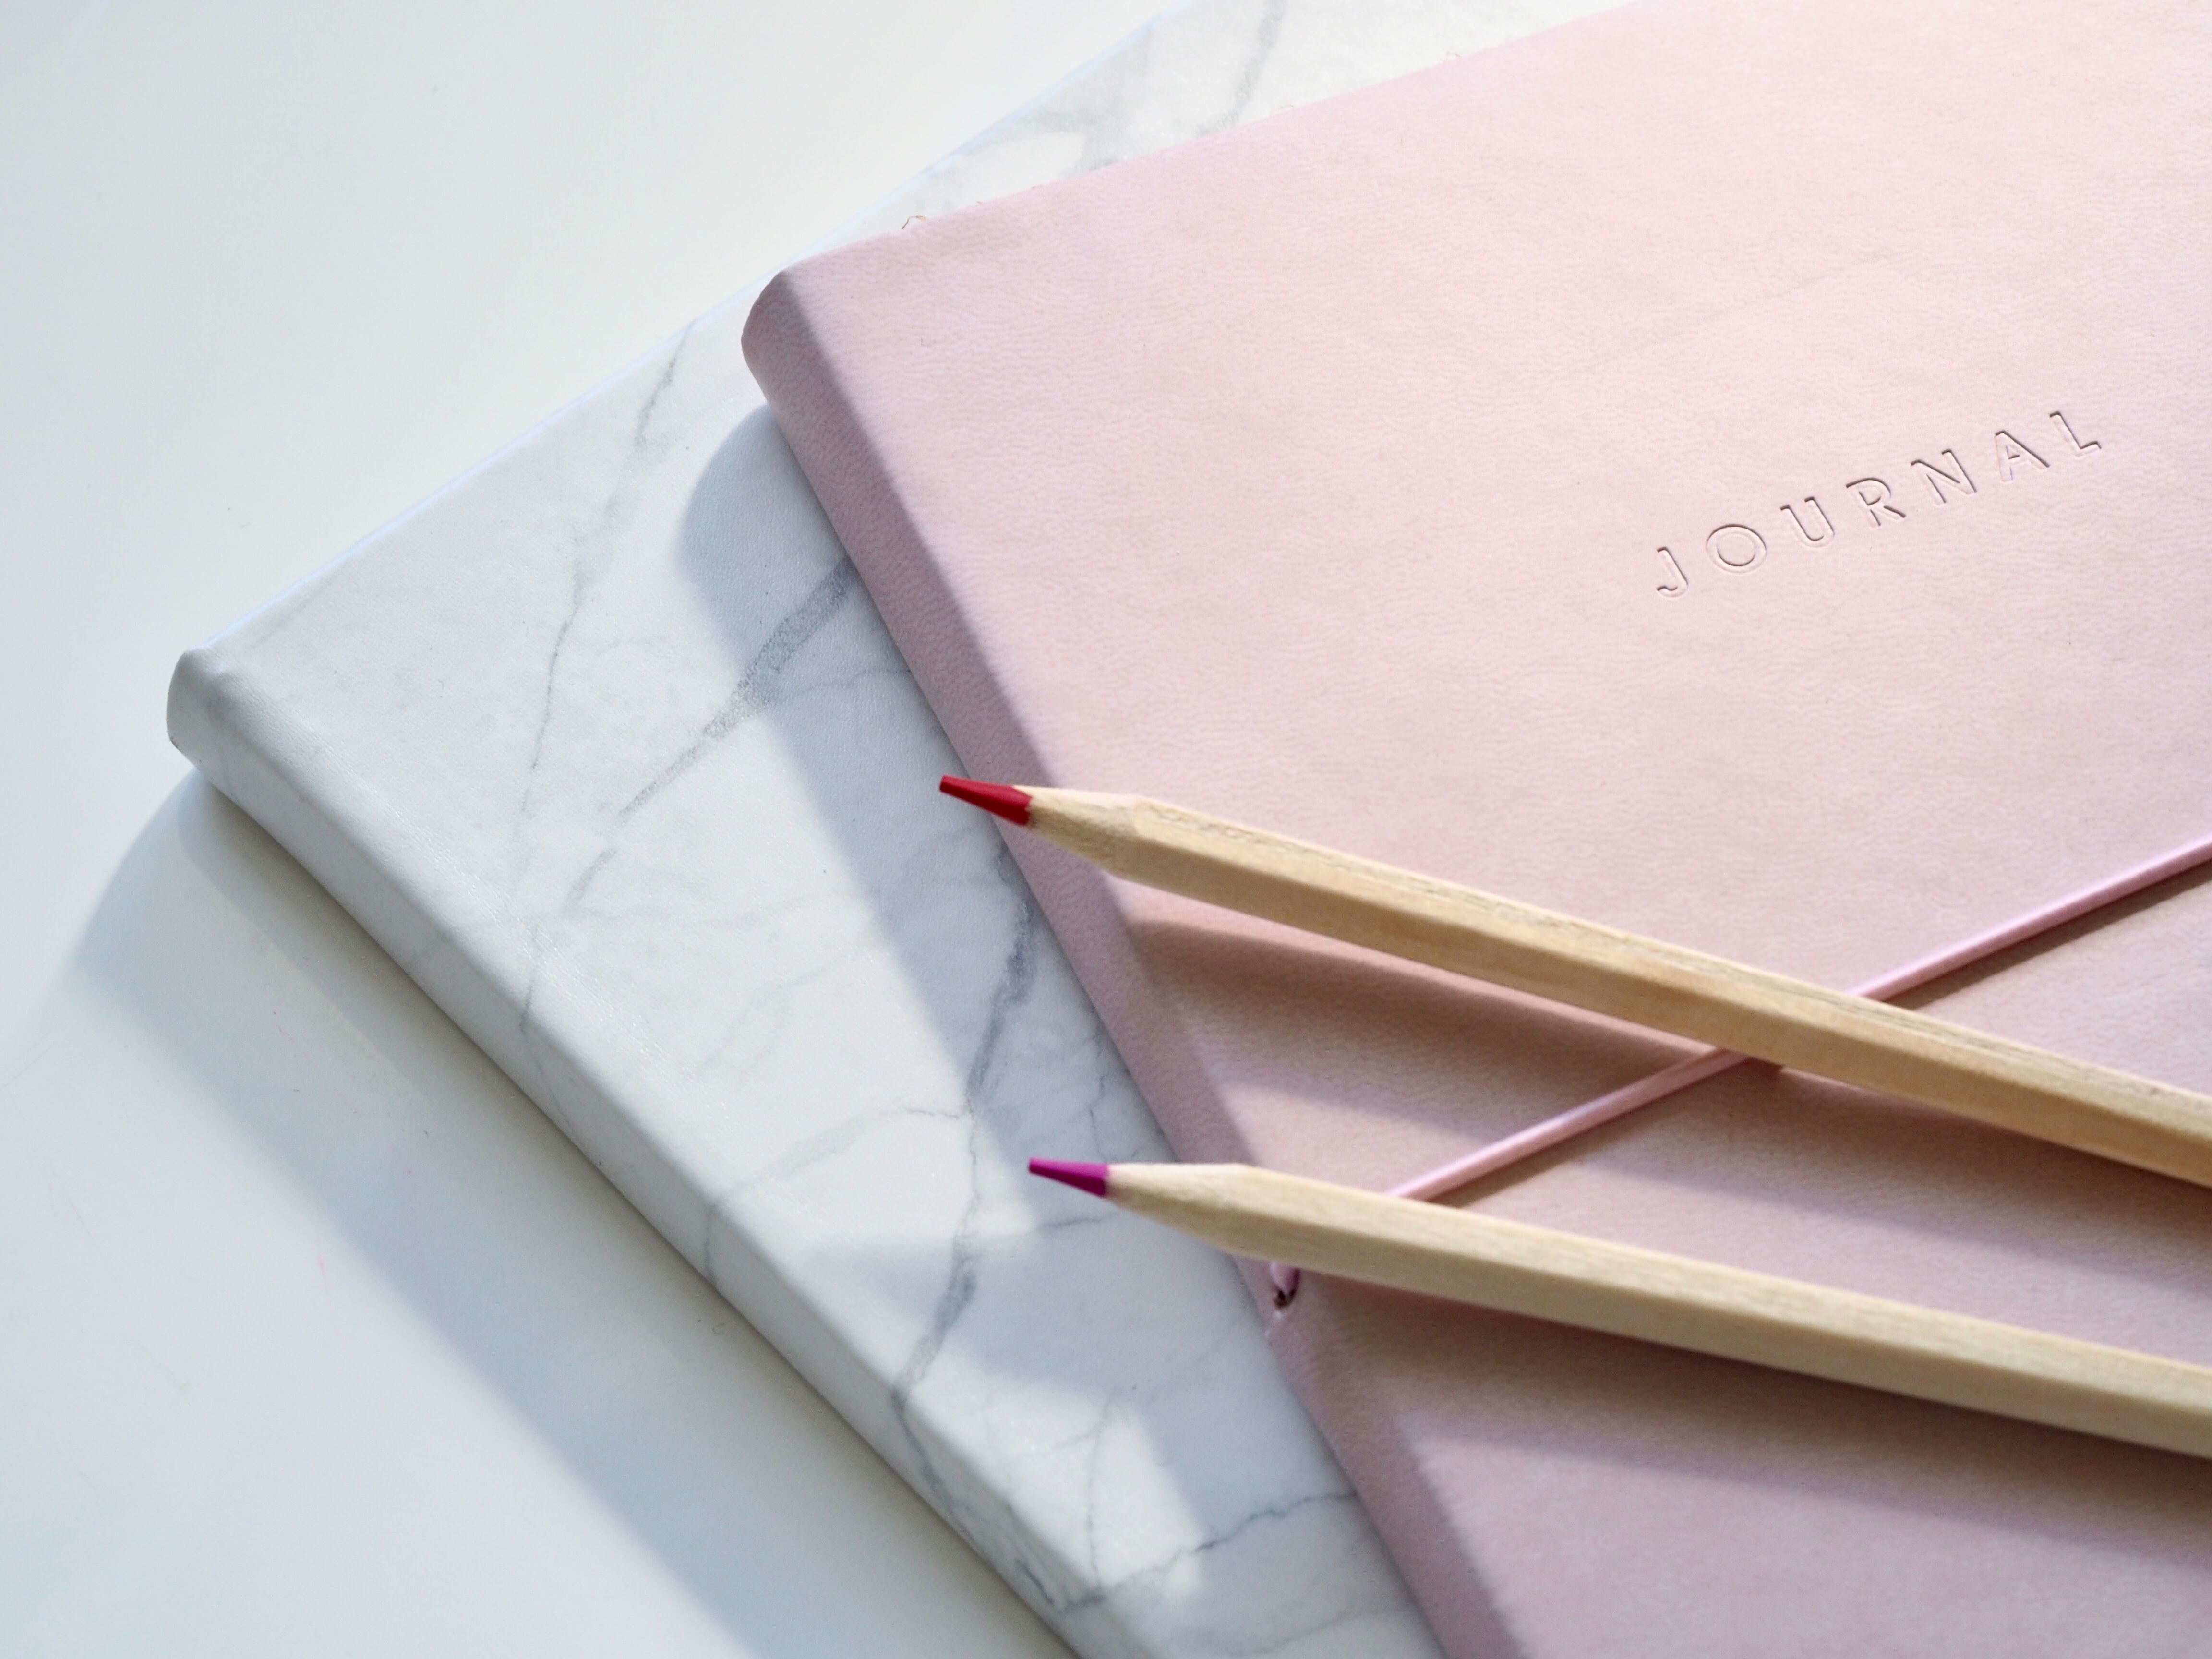 Two colored pencils sitting on pink and white marble notebooks.